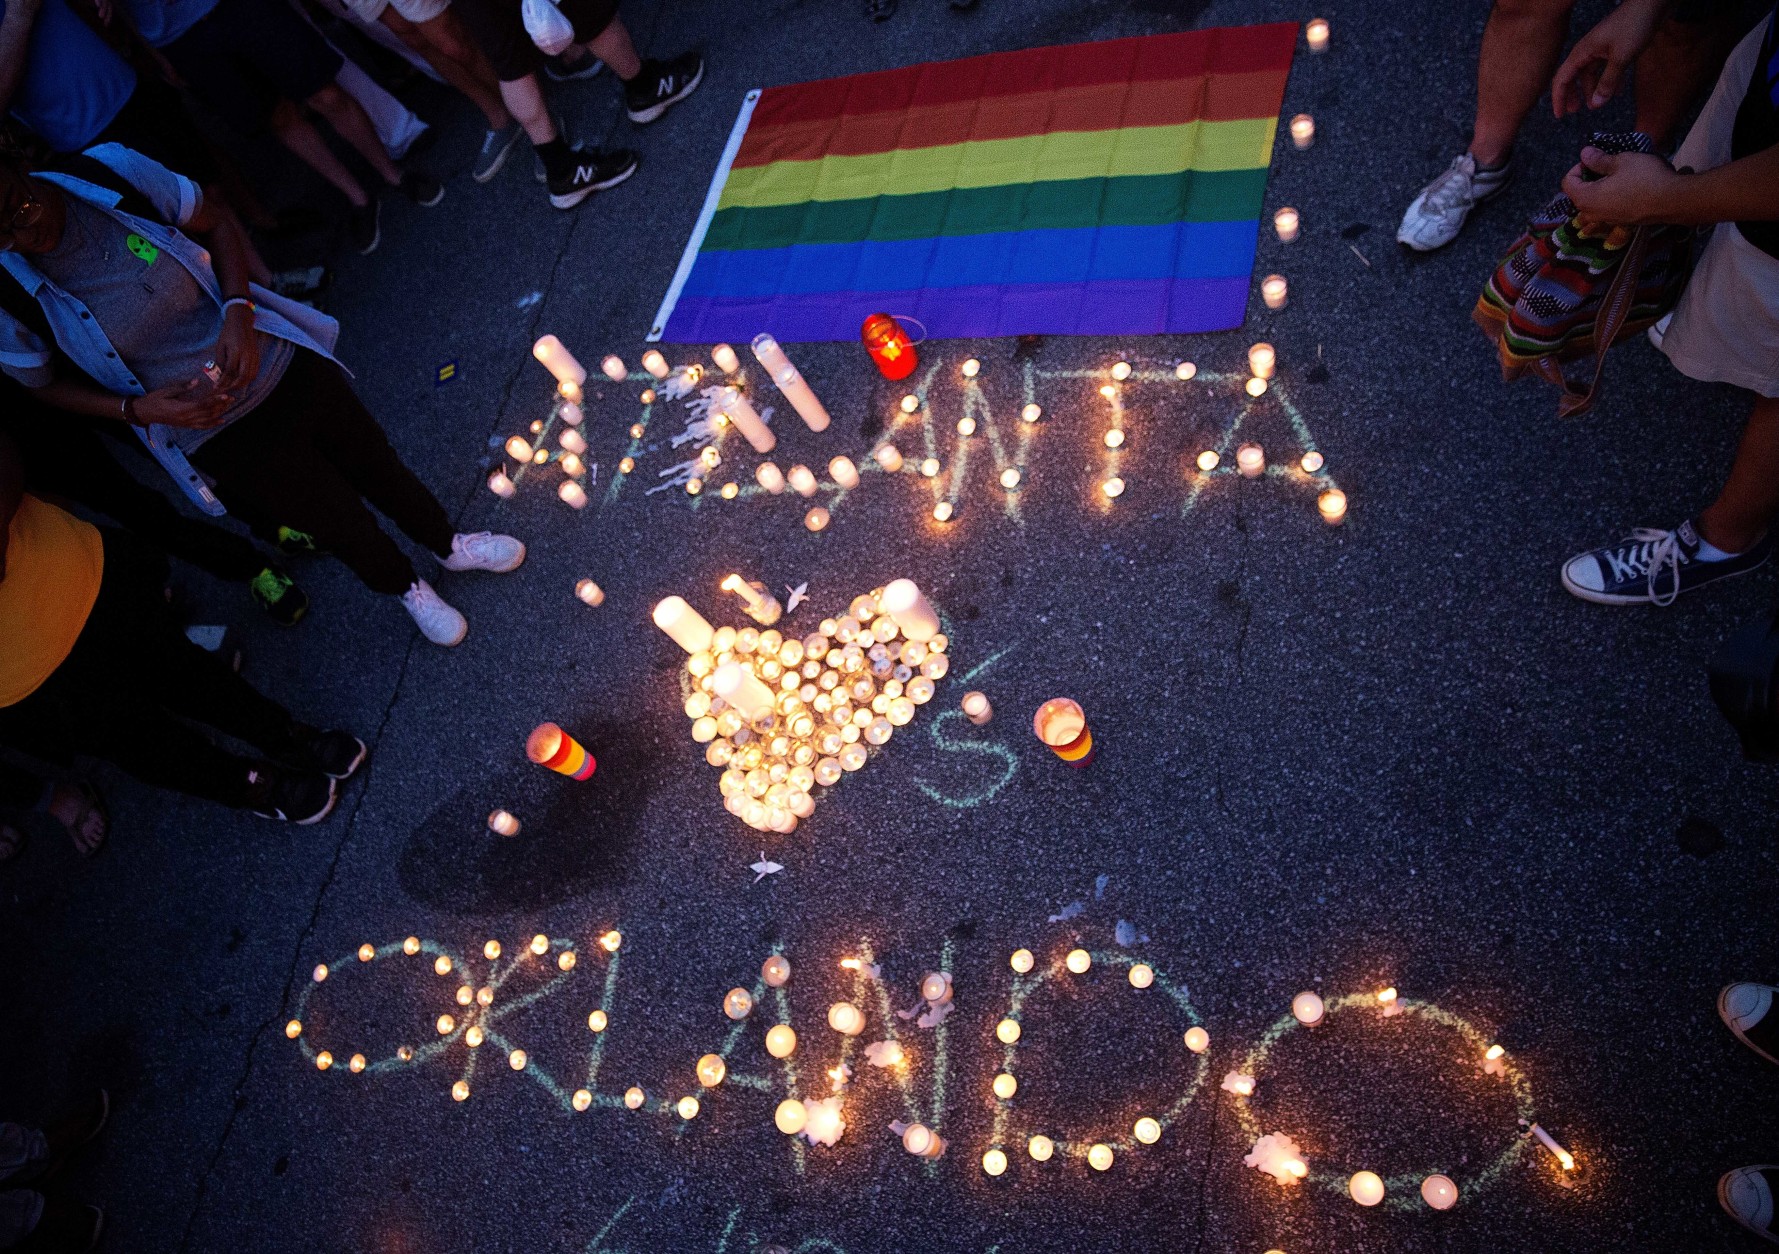 A message spelled out in candles is laid out at a vigil after a fatal shooting at an Orlando nightclub, Sunday, June 12, 2016, in Atlanta. (AP Photo/David Goldman)